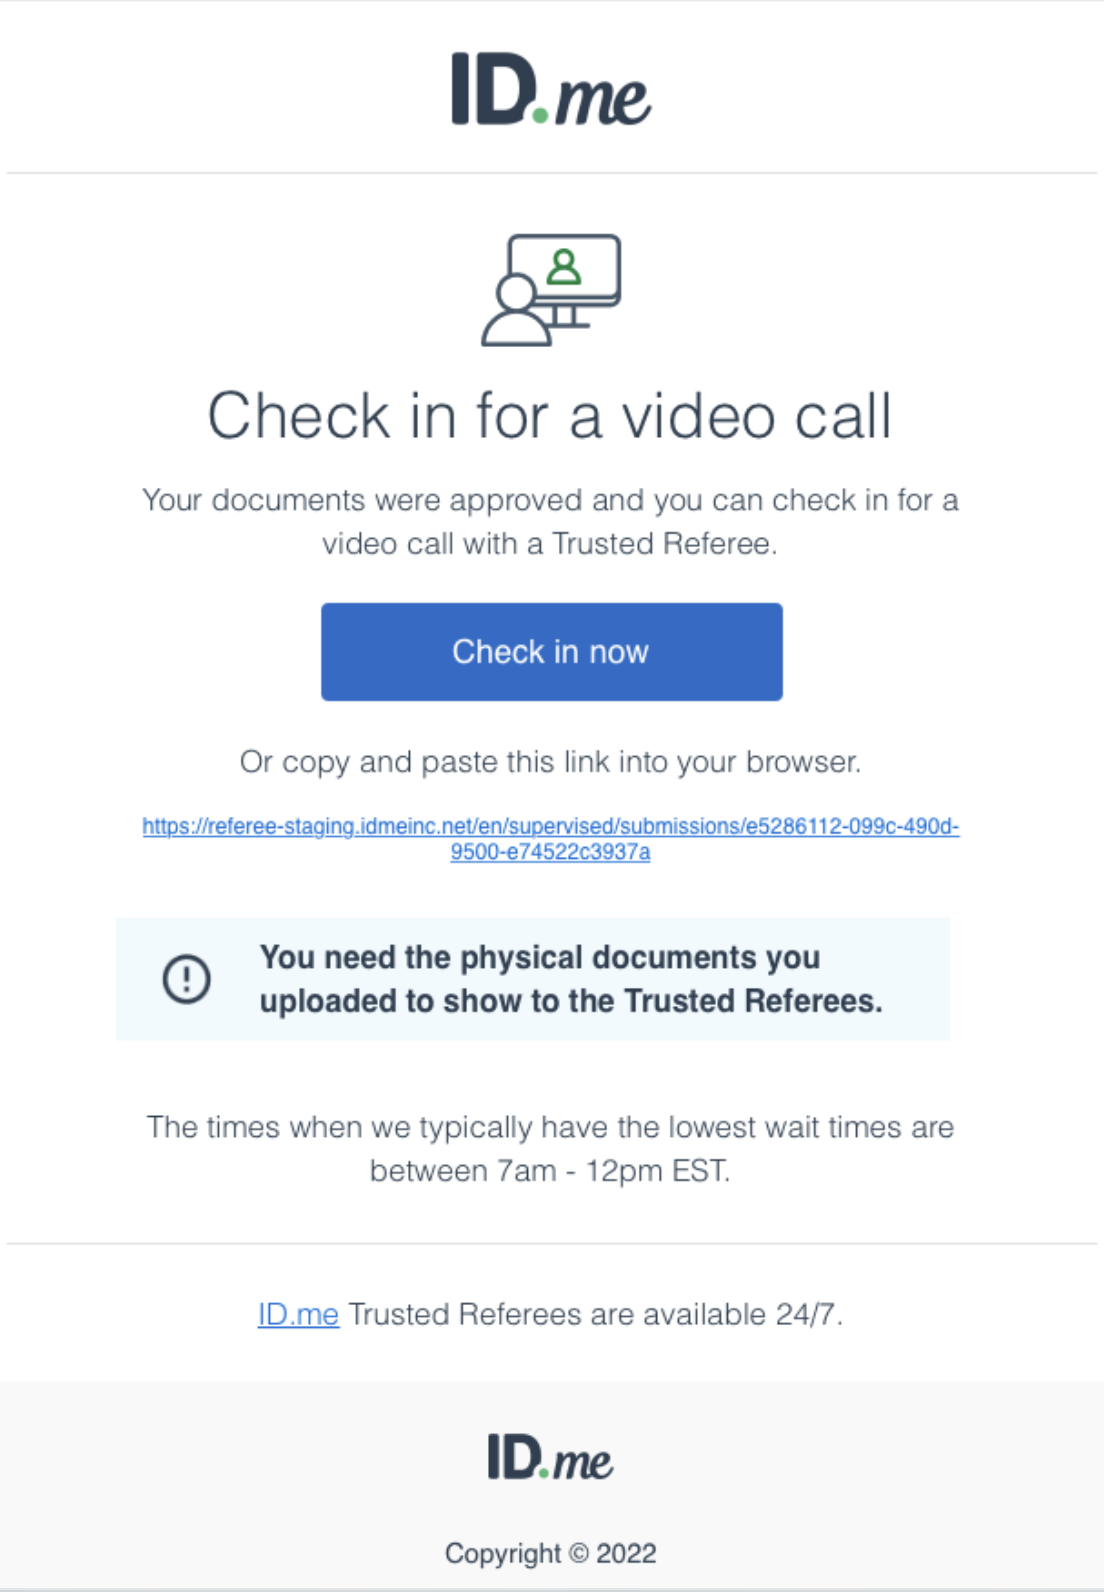 Check_in_now_for_your_video_call.png